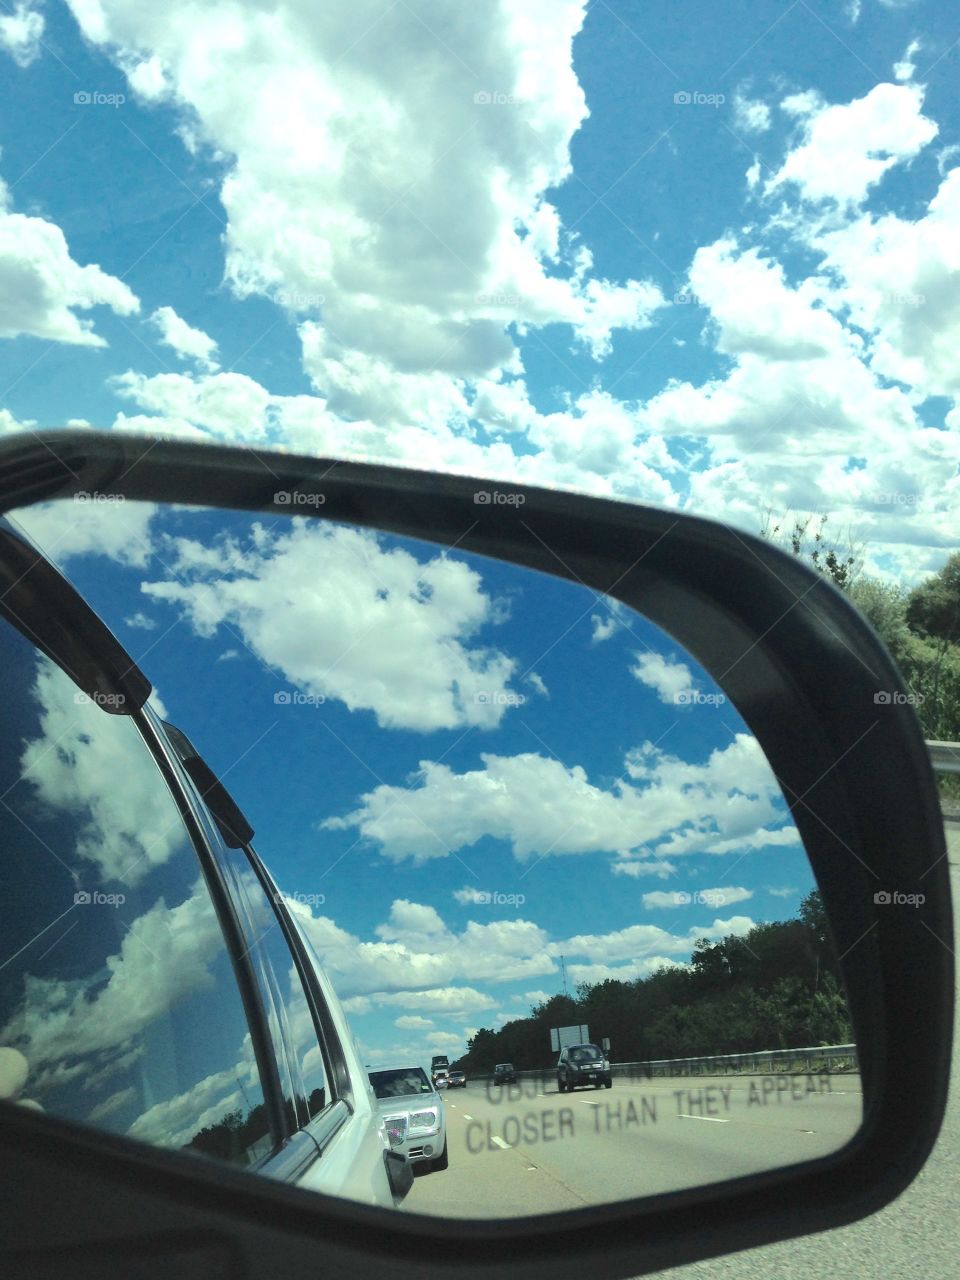 Rear View Mirror Clouds & Sky. Clouds in Rear View Mirror, Sky, Reflecting on Car. Amazing picture. Glad for my IPhone! Blue sky, white fluffy clouds.